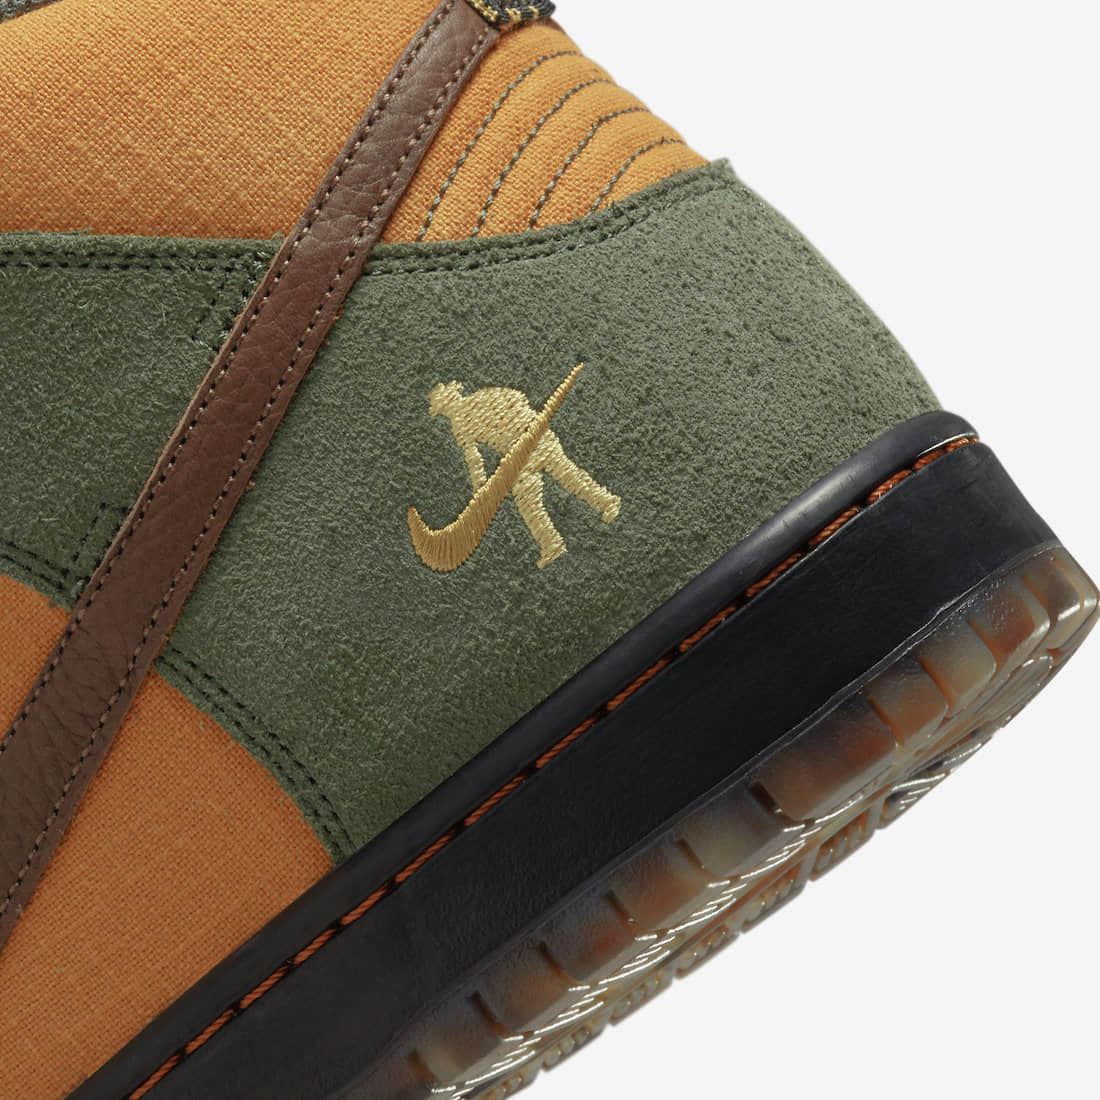 Nike Pass~Port x Dunk High SB 'Workboot' DO6119-300 - Limited Collaboration Edition